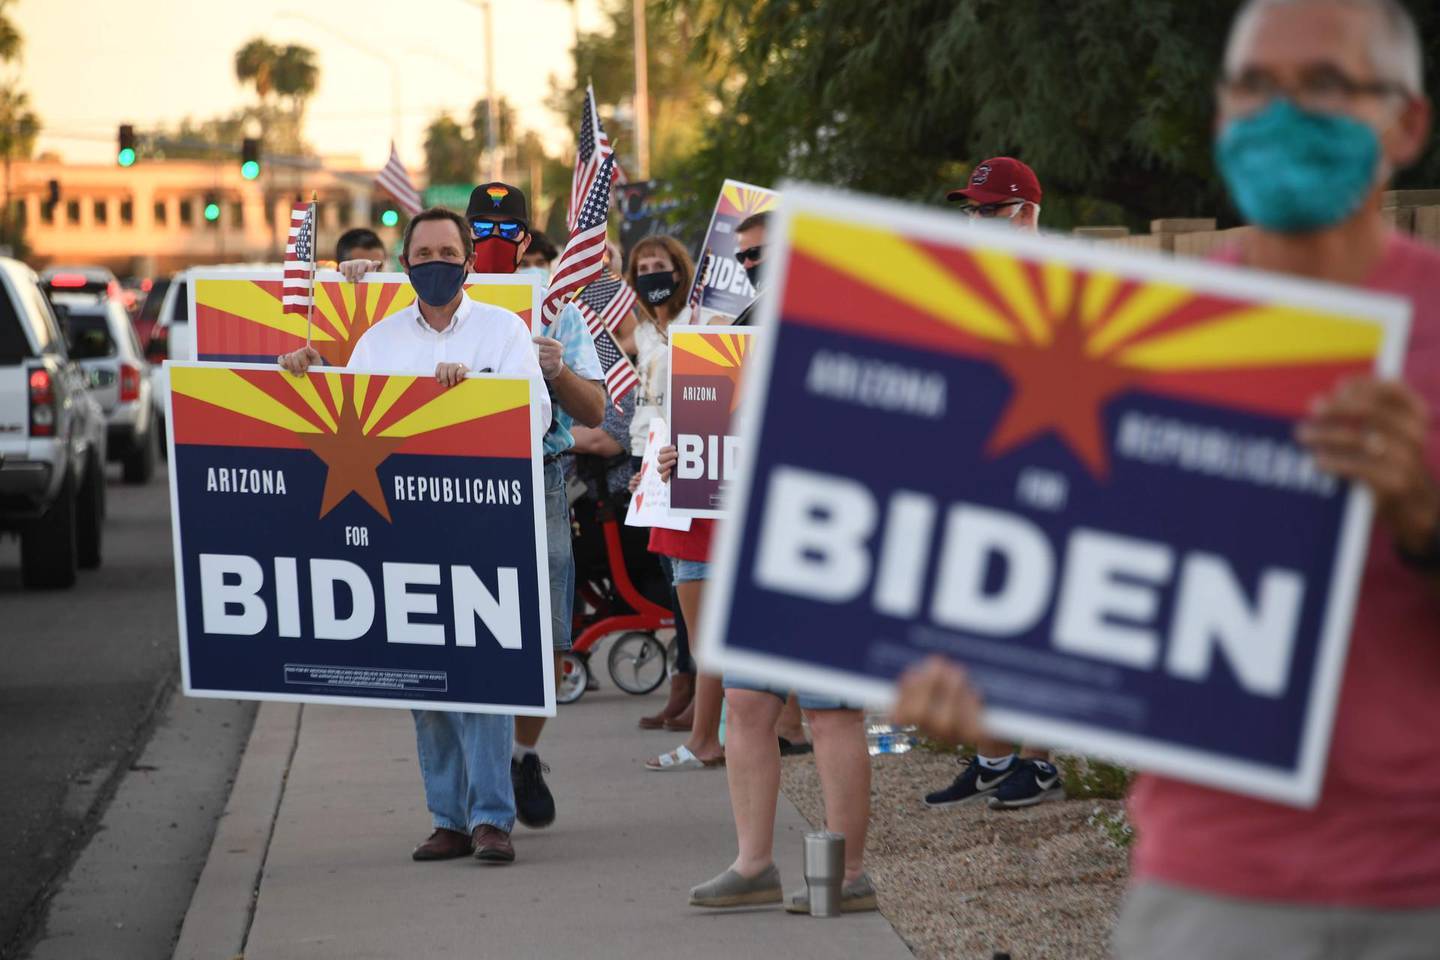 Members of the group "Arizona Republicans Who Believe In Treating Others With Respect" wave flags and hold signs in support of Democratic presidential candidate Joe Biden, during evening rush hour in Phoenix, Arizona on October 16, 2020. Arizona is one of the swing states that will determine the outcome of the November 3 US presidential election between Biden and US President Donald Trump. / AFP / Robyn Beck
